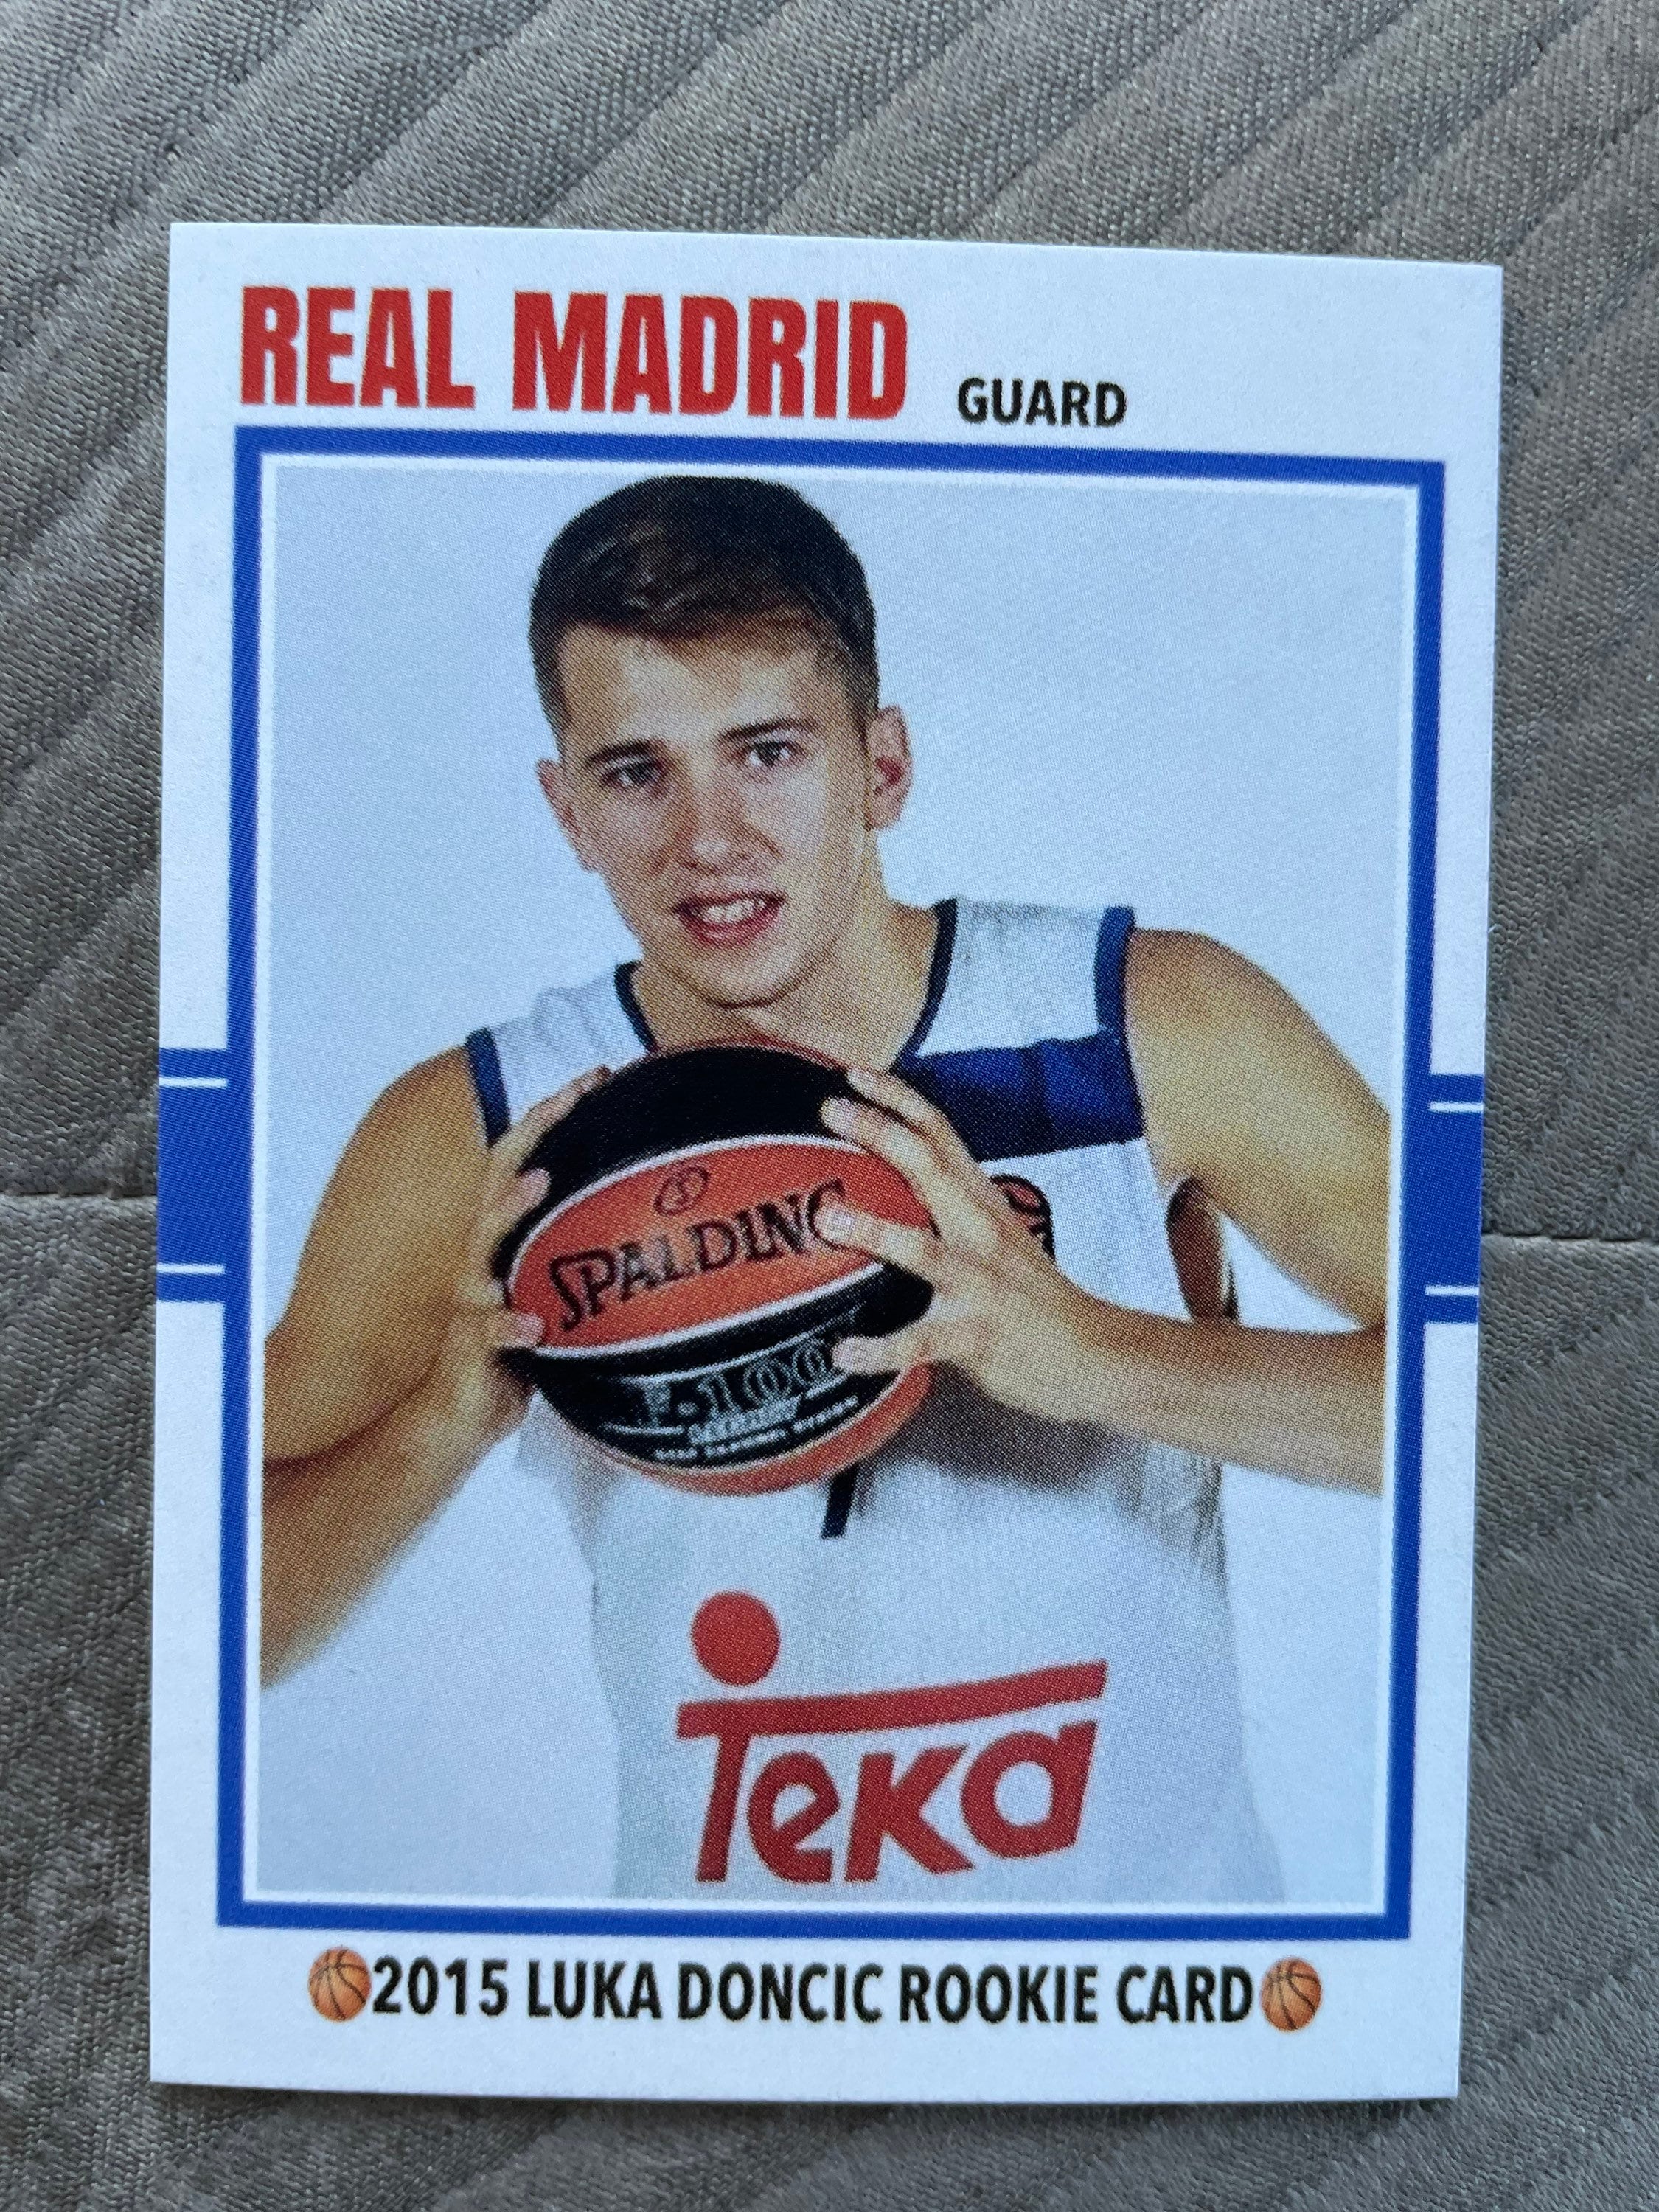 Only 50 Luka Doncic Custom Real Madrid 2015 Rookie Card